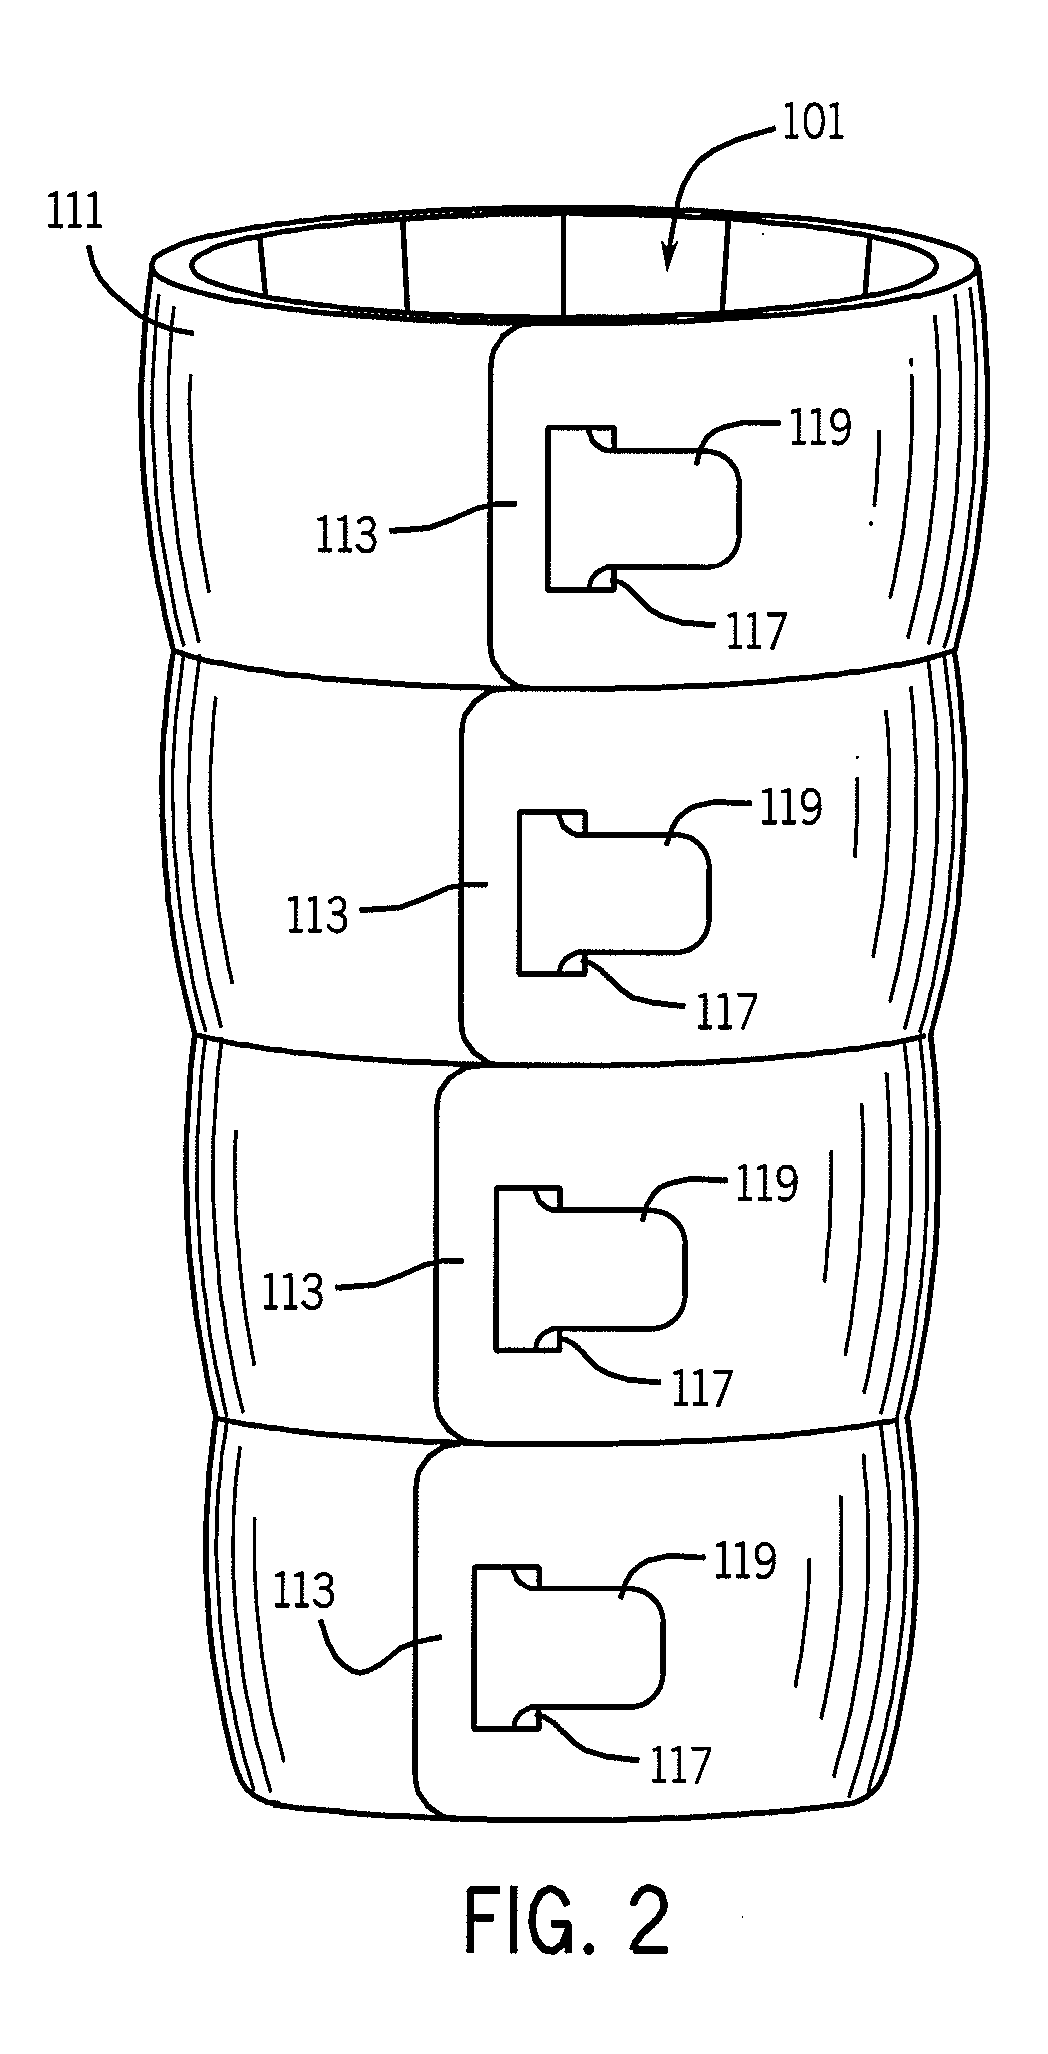 Therapeutic Device for Treating Soft Tissue Swelling and Fibrosis